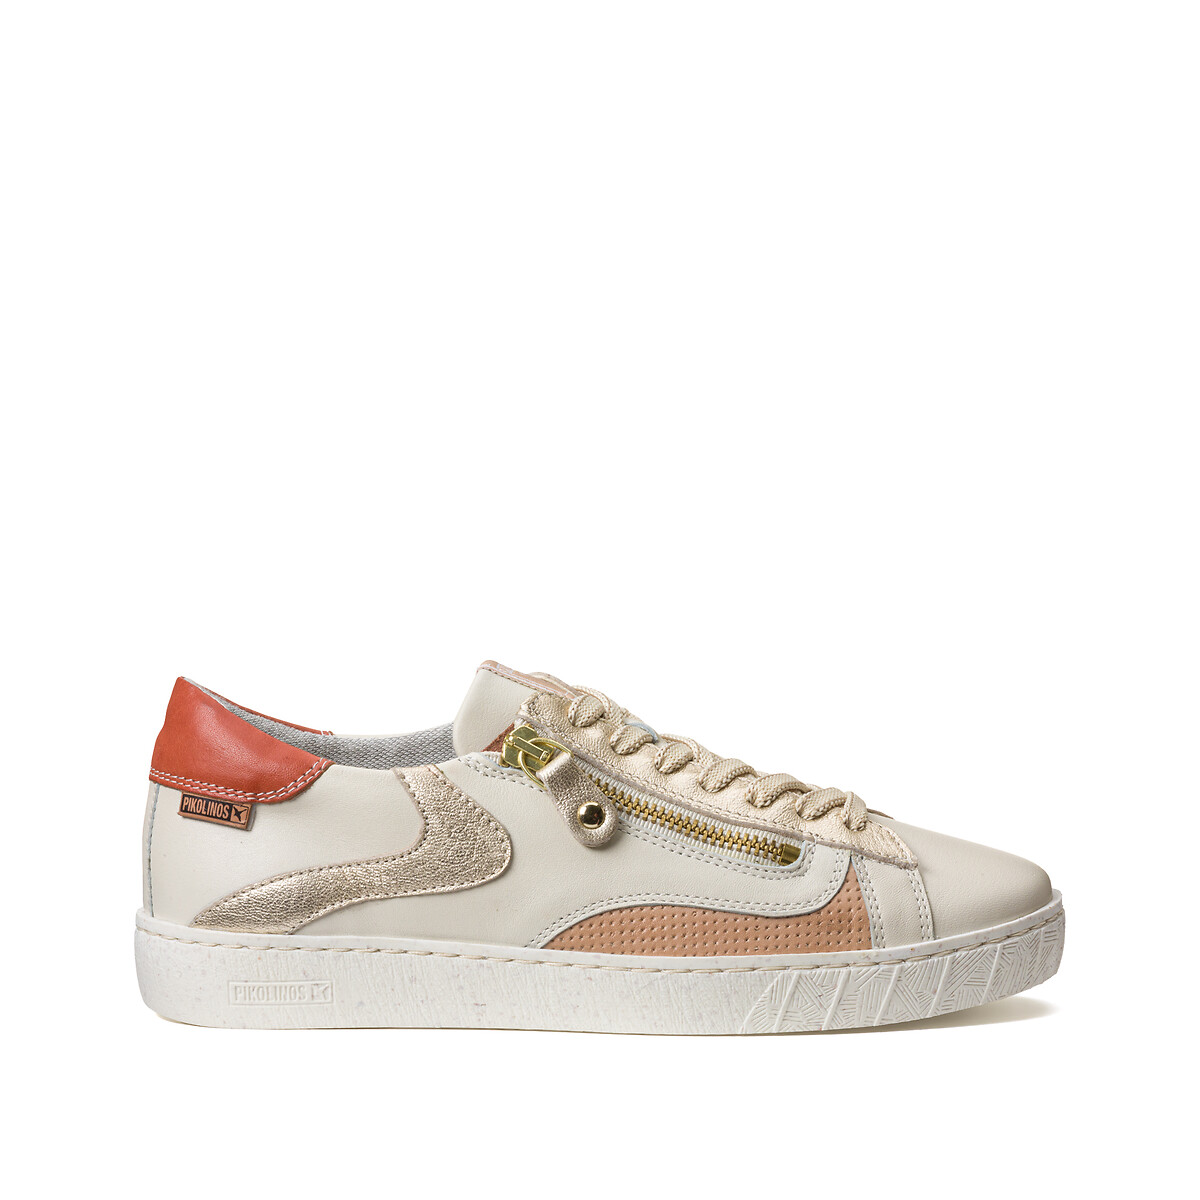 Lanzarote Leather Trainers